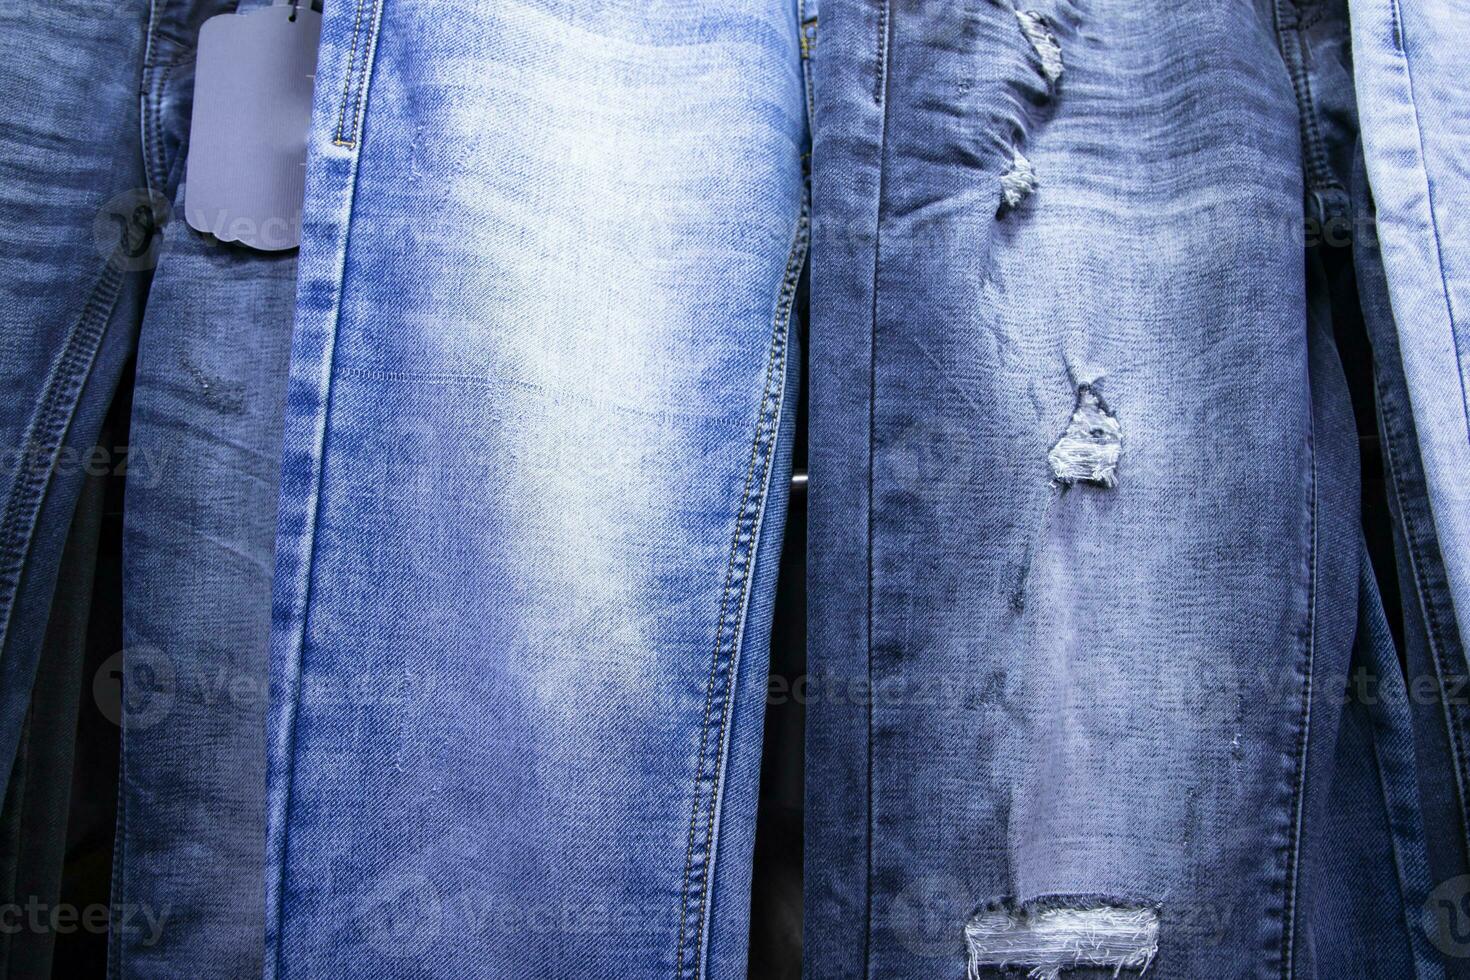 Variety Jeans pant pattern texture Can be used as a Background wallpaper photo